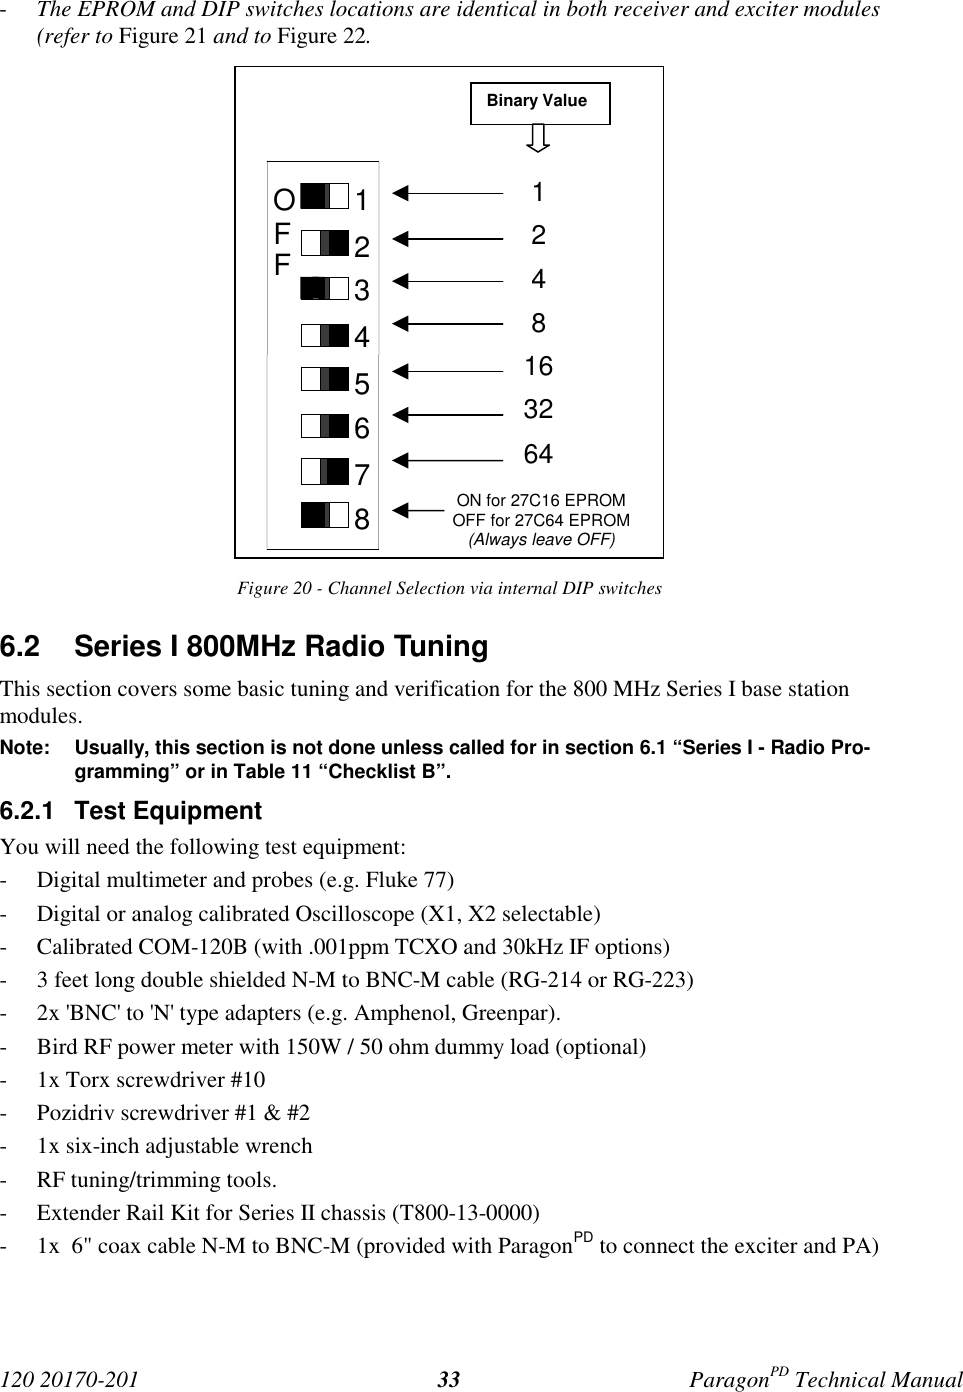 120 20170-201 ParagonPD Technical Manual33- The EPROM and DIP switches locations are identical in both receiver and exciter modules(refer to Figure 21 and to Figure 22.Figure 20 - Channel Selection via internal DIP switches6.2  Series I 800MHz Radio TuningThis section covers some basic tuning and verification for the 800 MHz Series I base stationmodules.Note: Usually, this section is not done unless called for in section 6.1 “Series I - Radio Pro-gramming” or in Table 11 “Checklist B”.6.2.1 Test EquipmentYou will need the following test equipment:- Digital multimeter and probes (e.g. Fluke 77)- Digital or analog calibrated Oscilloscope (X1, X2 selectable)- Calibrated COM-120B (with .001ppm TCXO and 30kHz IF options)- 3 feet long double shielded N-M to BNC-M cable (RG-214 or RG-223)- 2x &apos;BNC&apos; to &apos;N&apos; type adapters (e.g. Amphenol, Greenpar).- Bird RF power meter with 150W / 50 ohm dummy load (optional)- 1x Torx screwdriver #10- Pozidriv screwdriver #1 &amp; #2- 1x six-inch adjustable wrench- RF tuning/trimming tools.- Extender Rail Kit for Series II chassis (T800-13-0000)- 1x  6&quot; coax cable N-M to BNC-M (provided with ParagonPD to connect the exciter and PA)12345678OFFBinary Value1248163264ON for 27C16 EPROMOFF for 27C64 EPROM(Always leave OFF)